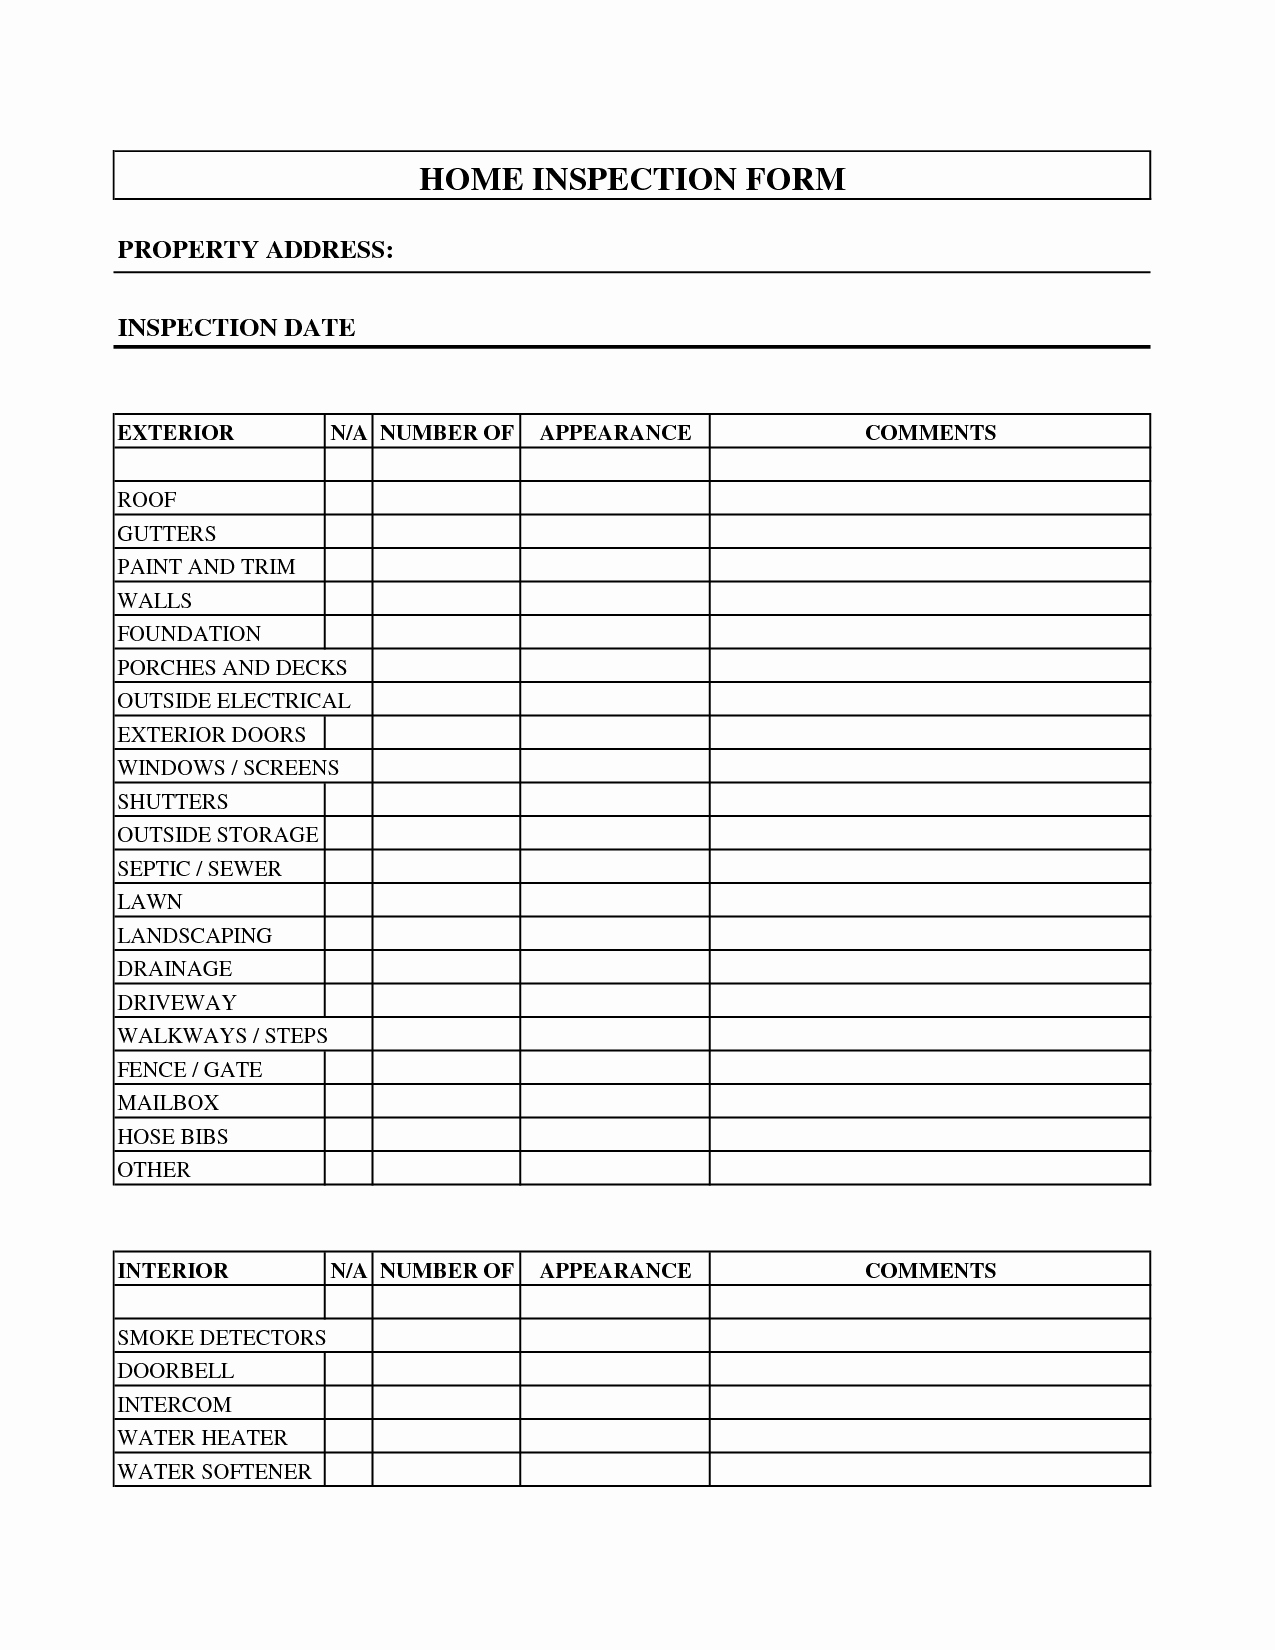 Home Inspection Checklist Template Beautiful Property Inspection form Template